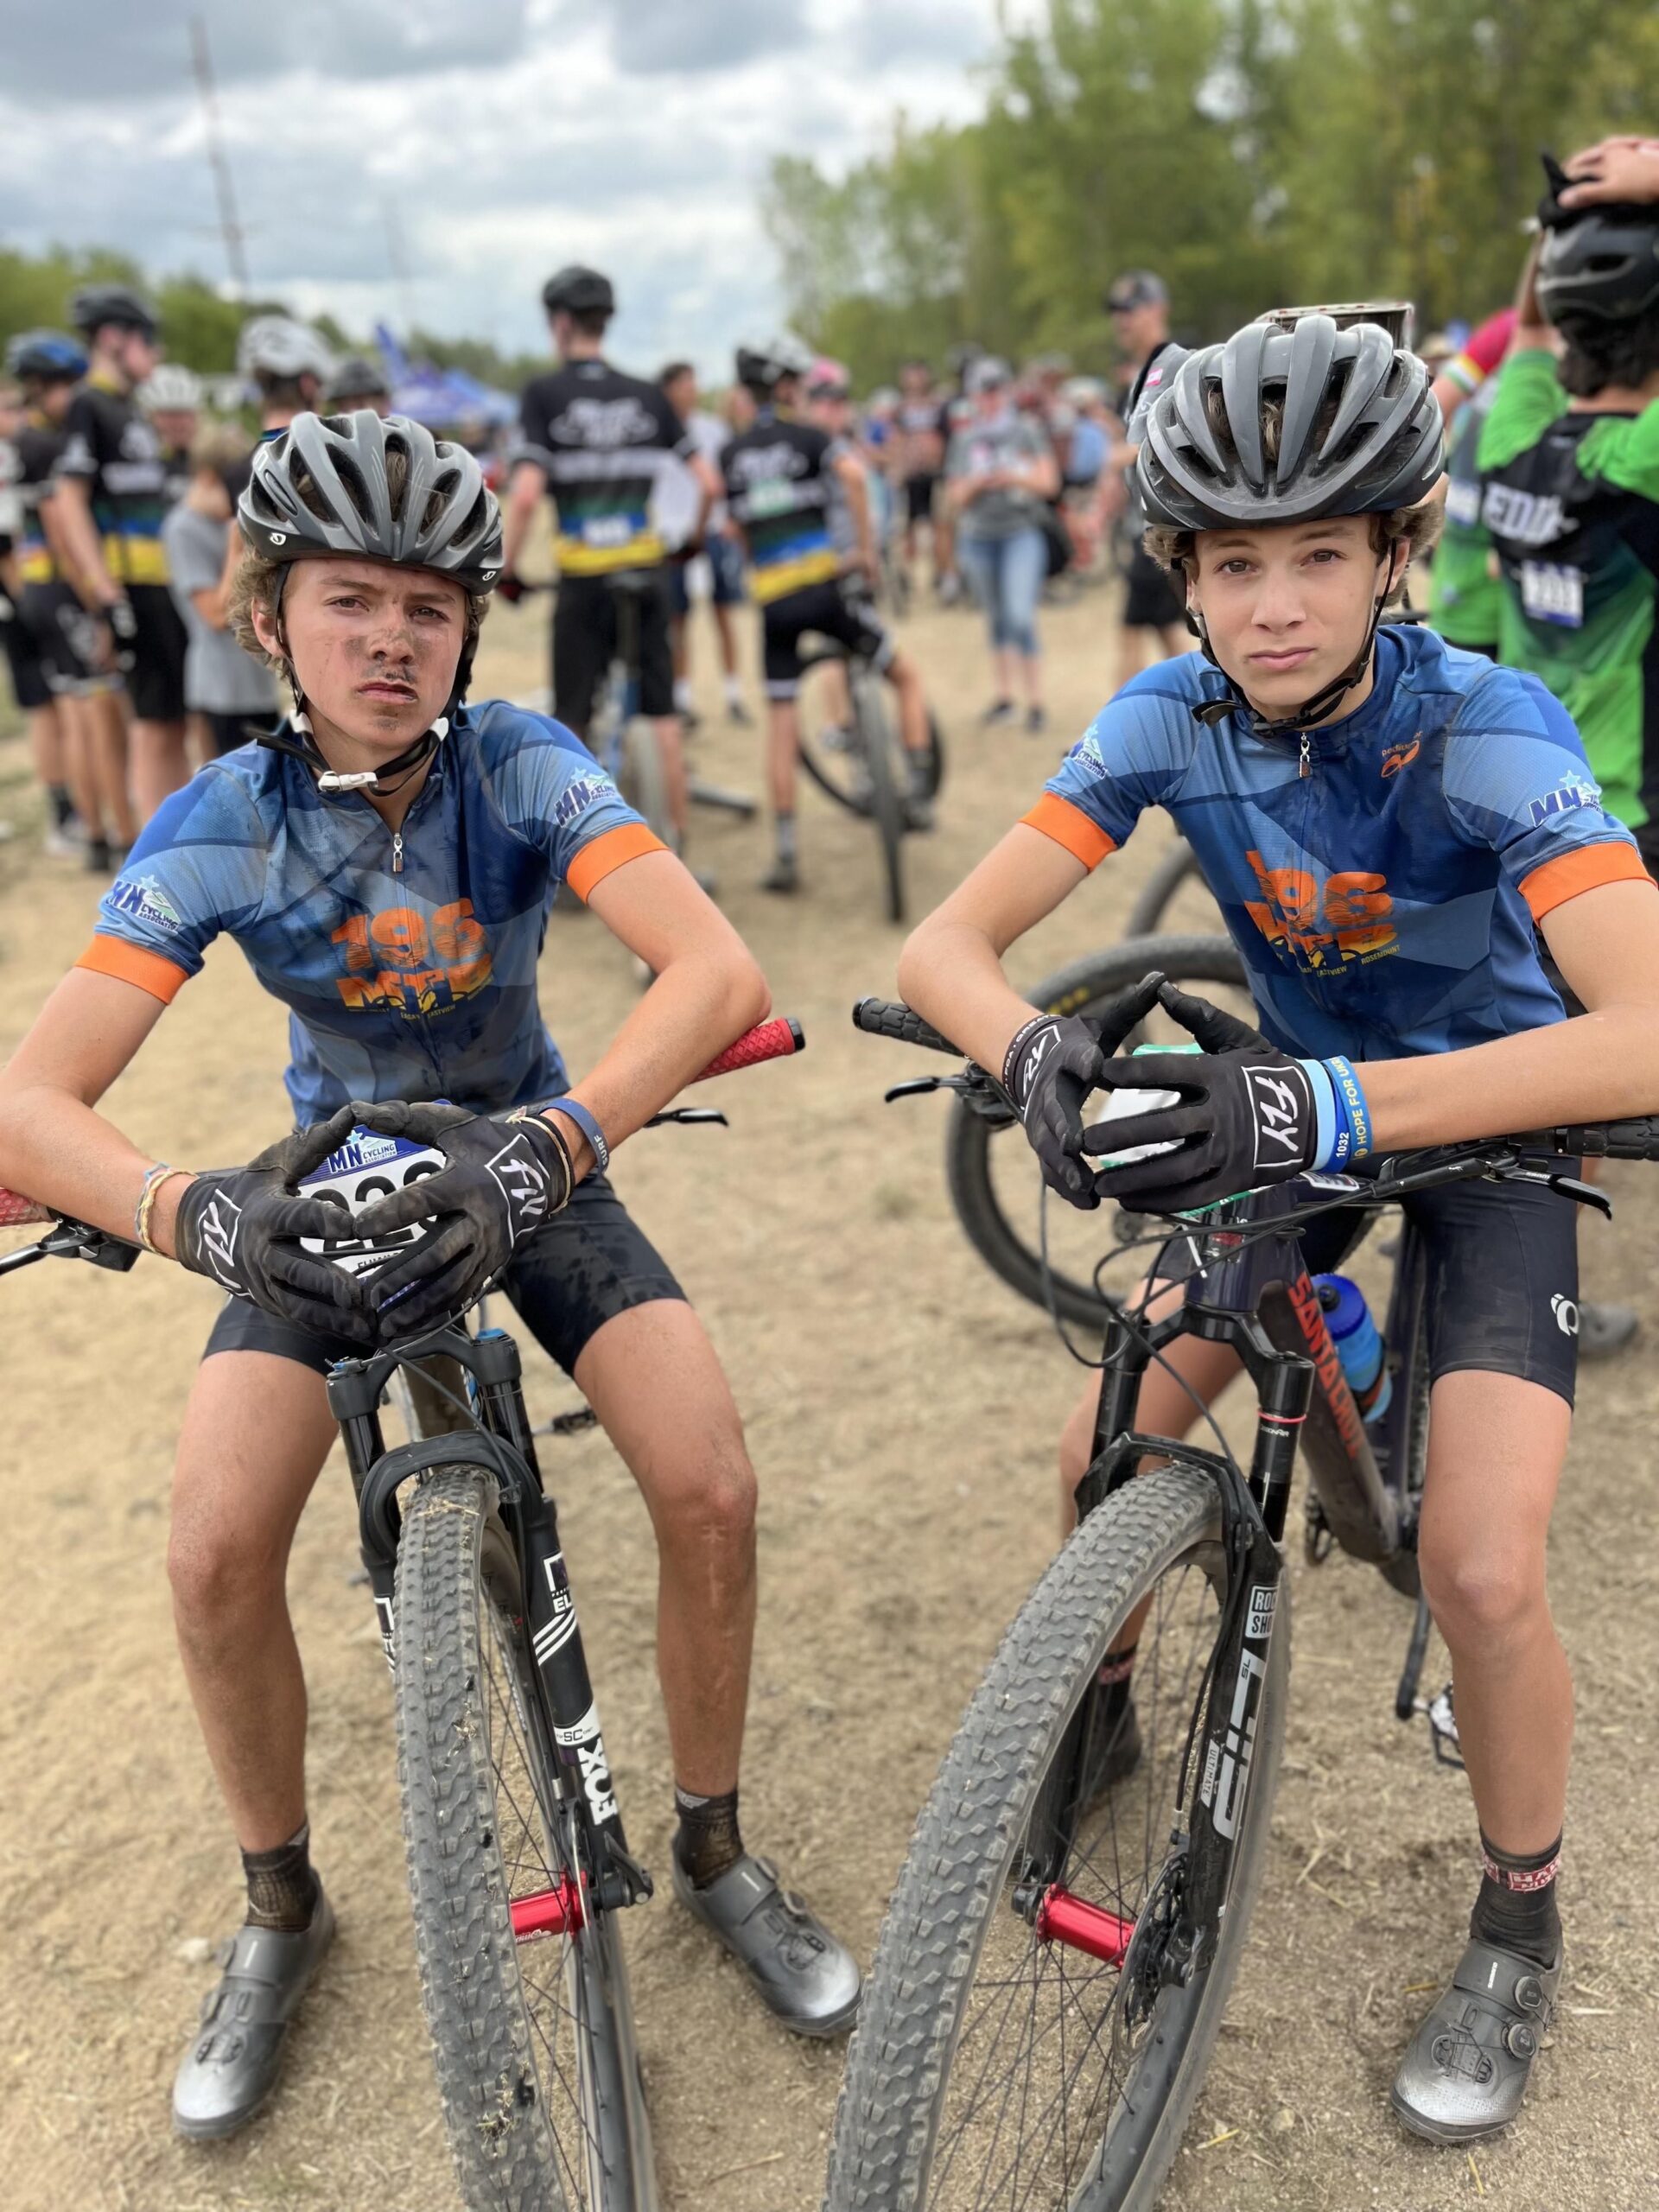 Two boys sitting on their bikes posing in front of the camera after a race